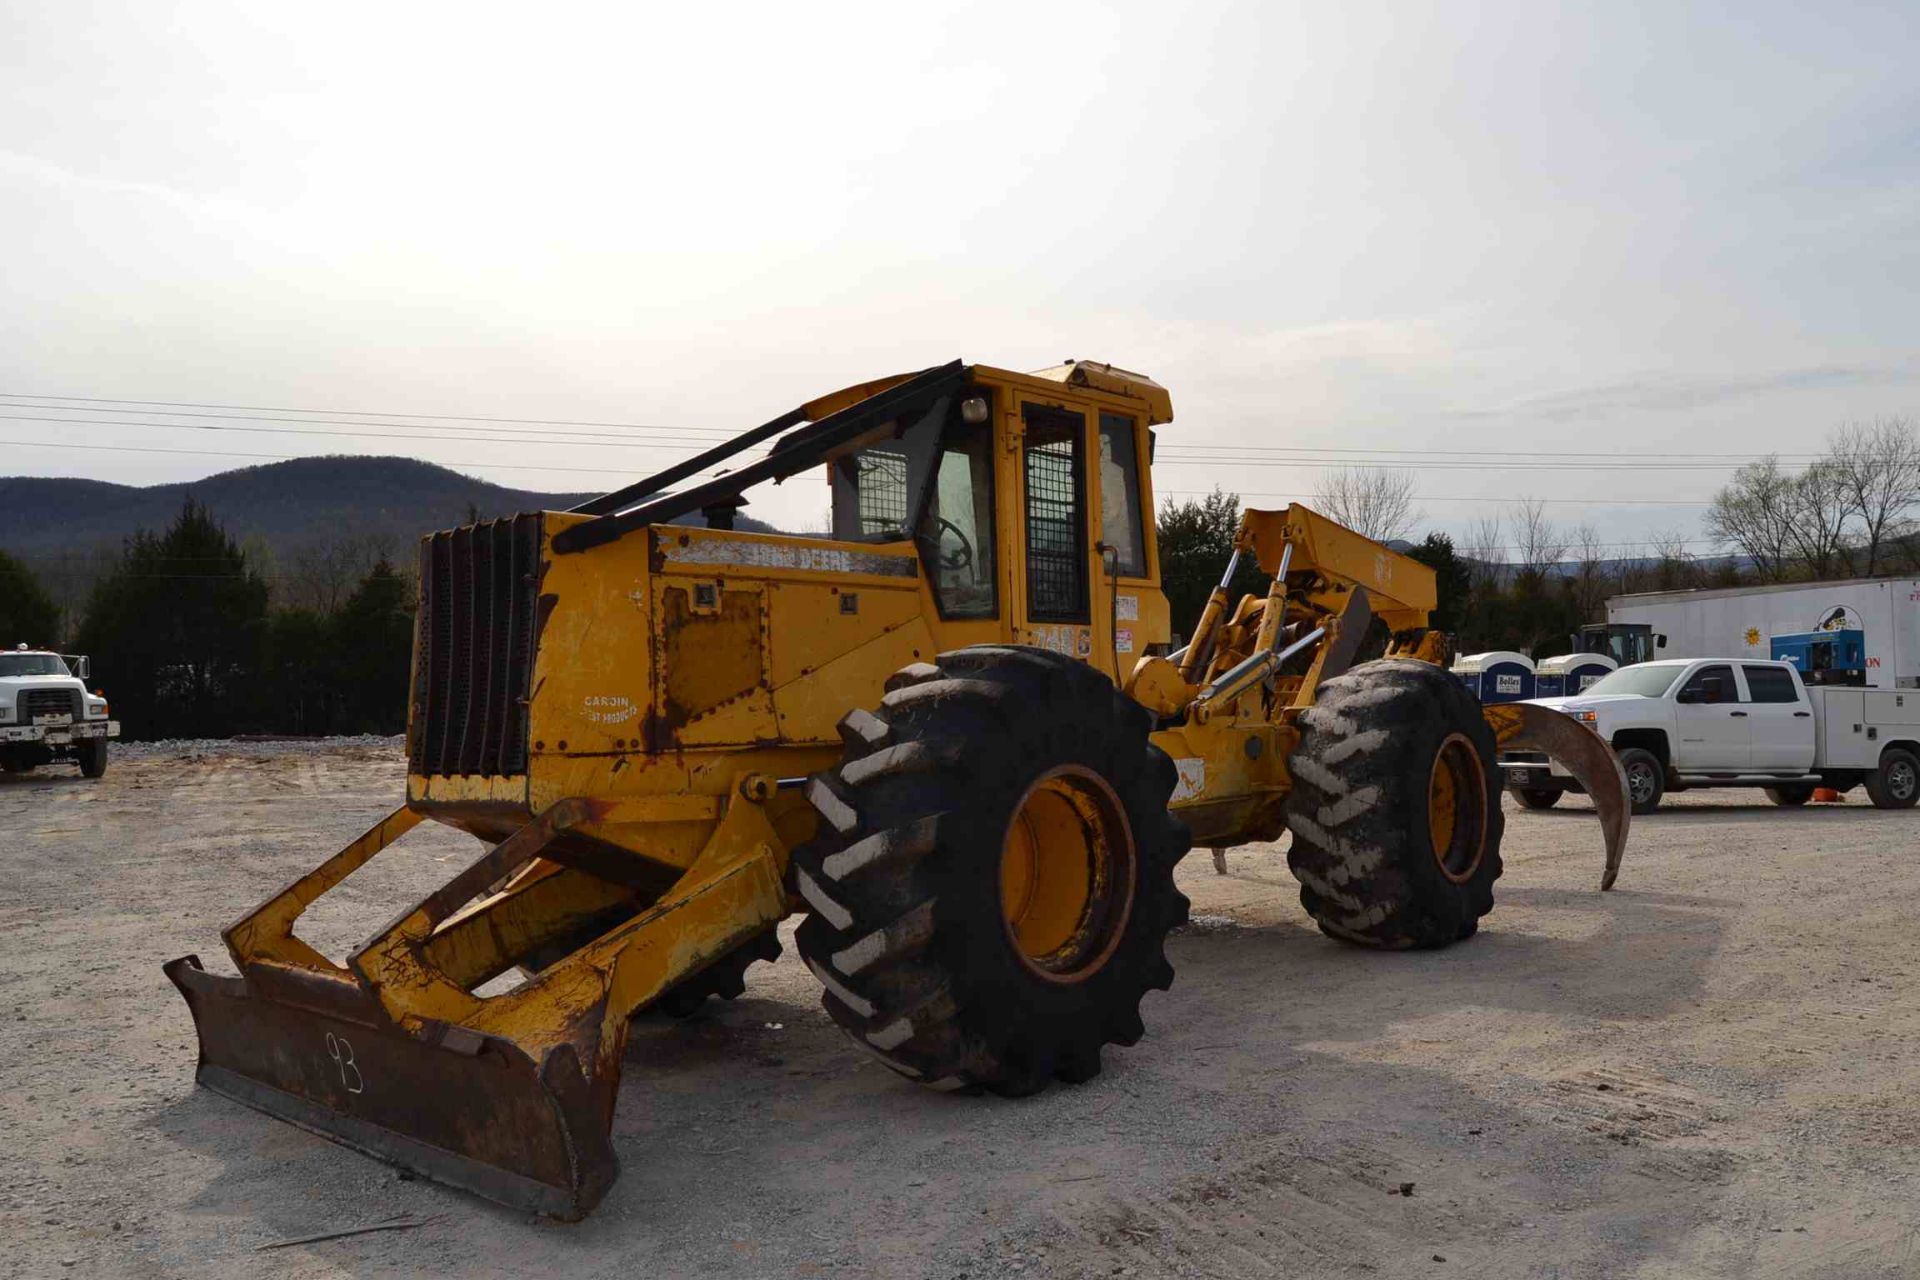 1998 JOHN DEERE 748G DUAL ARCH GRAPPLE SKIDDER W/30.5X32 RUBBER; S/N-565595; W/8,710 HOURS - Image 4 of 4